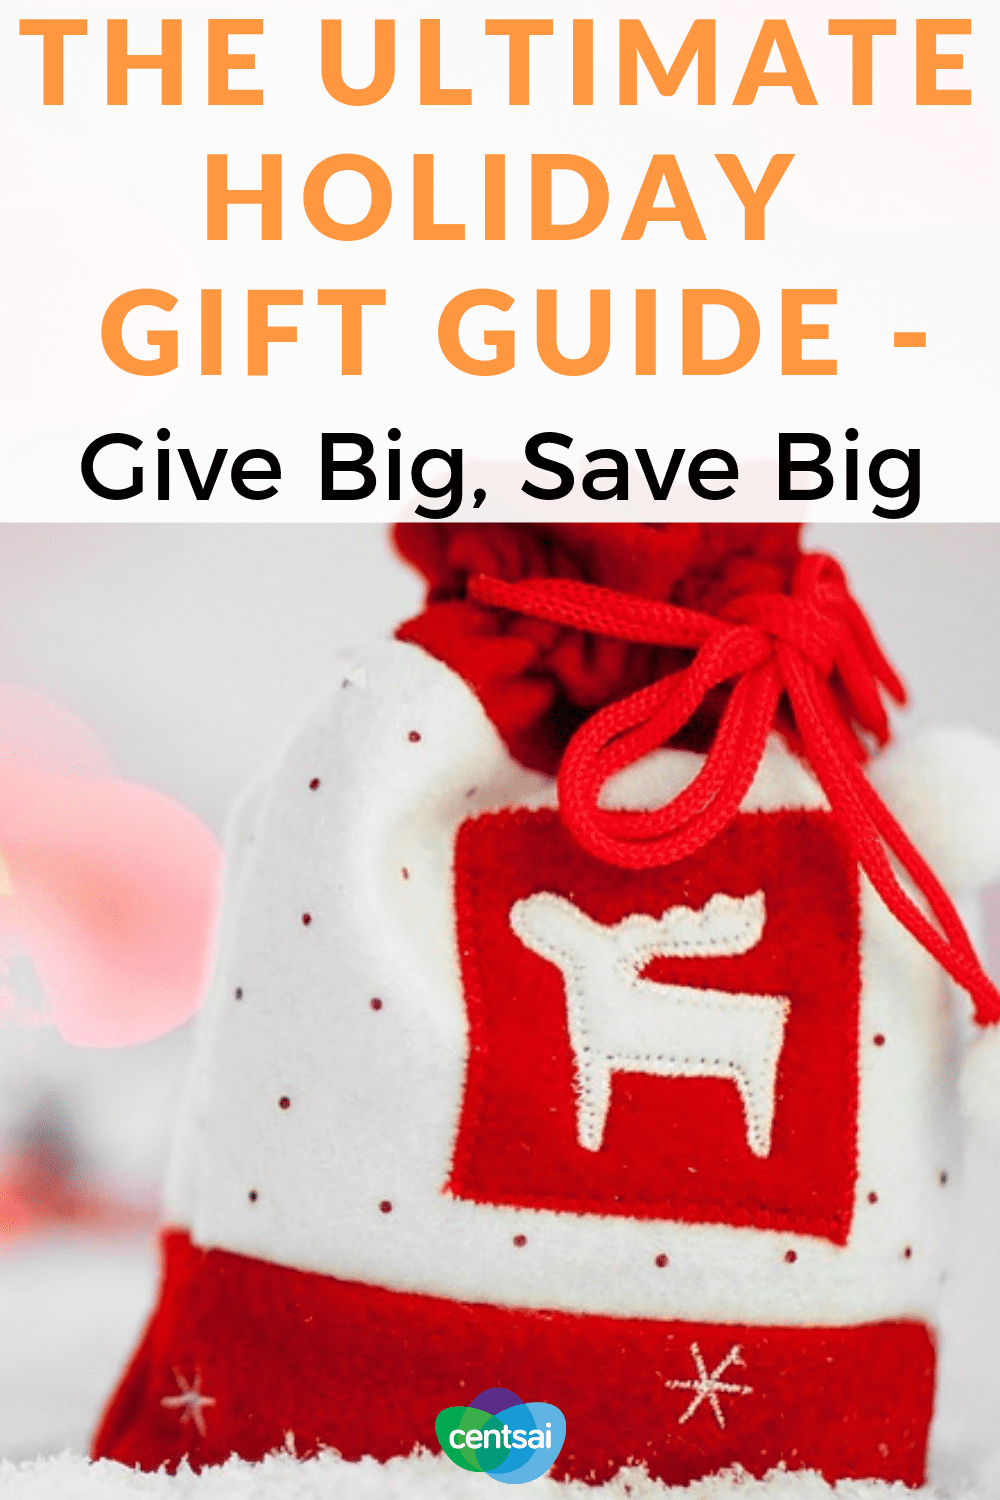 The Ultimate Holiday Gift Guide — Give Big, Save Big. Haven't bought presents yet? How will your family know you love them? Check out our holiday gift guide to get great ideas and save big bucks. #holidays #shopping #giftideas